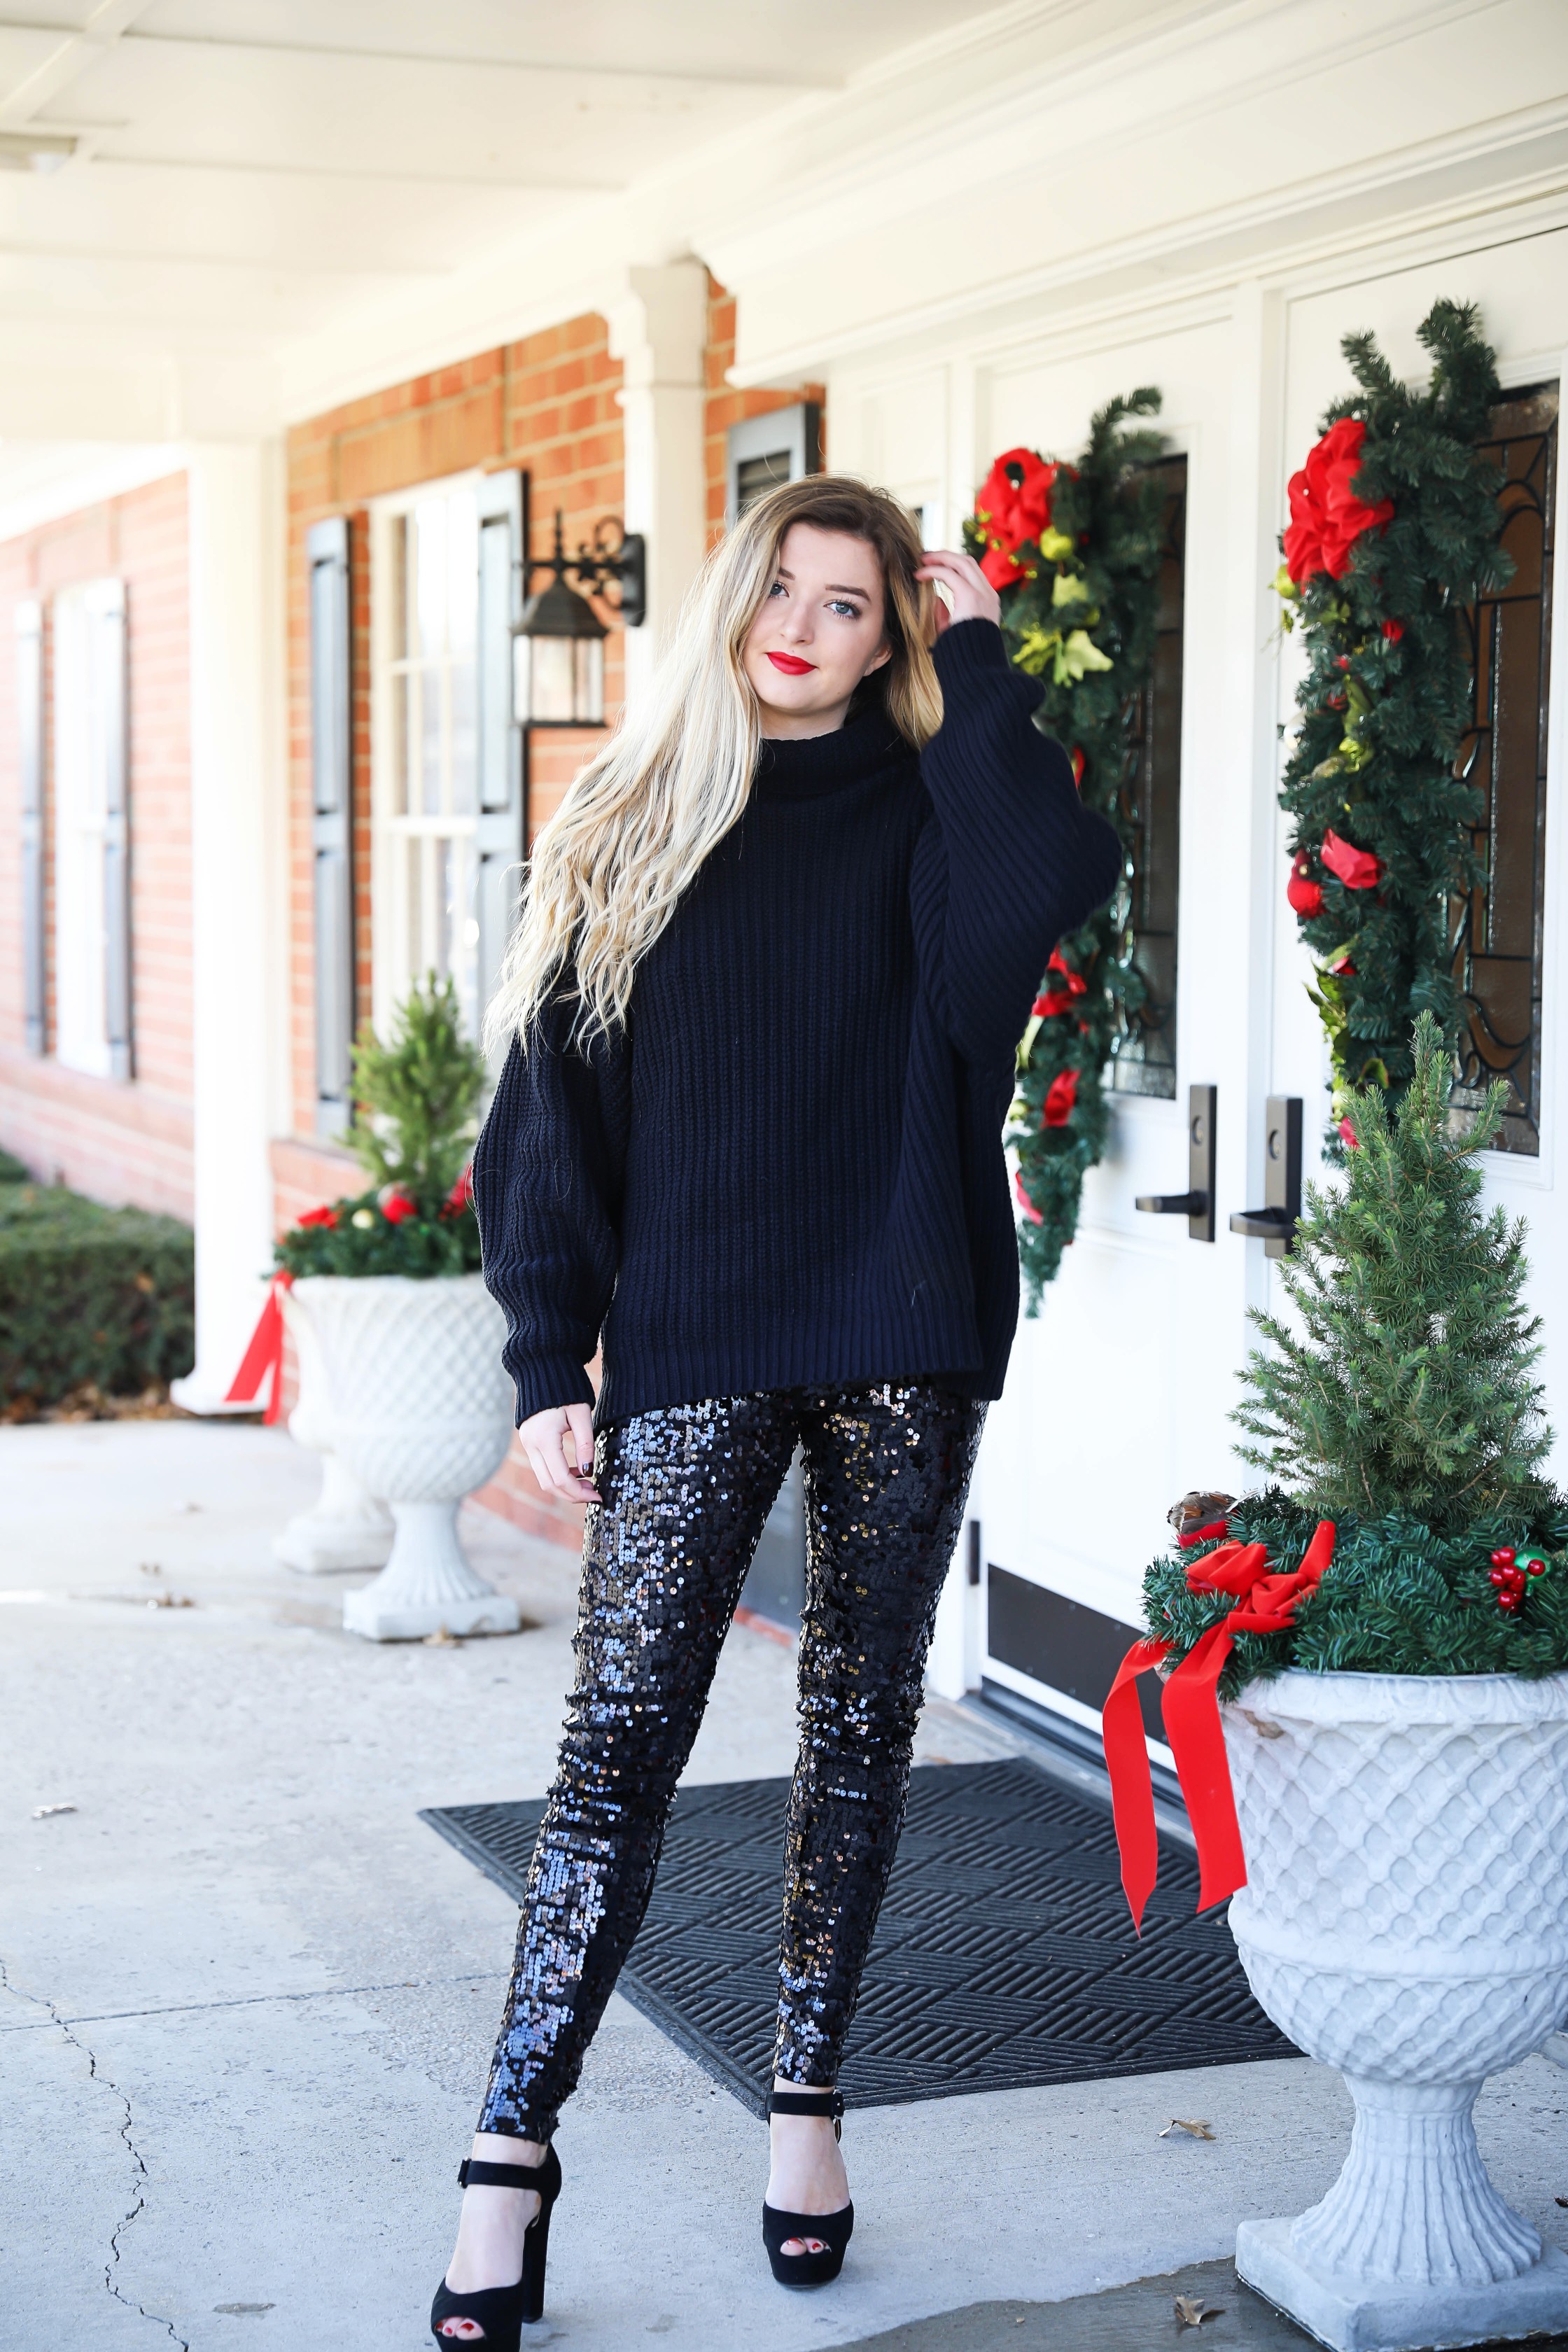 New Years eve outfit idea! Sequin pants and a black sweater, perfect for  NYE! How to style sequin pants for nye! Details on fashio blog daily dose  of charm by lauren lindmark –